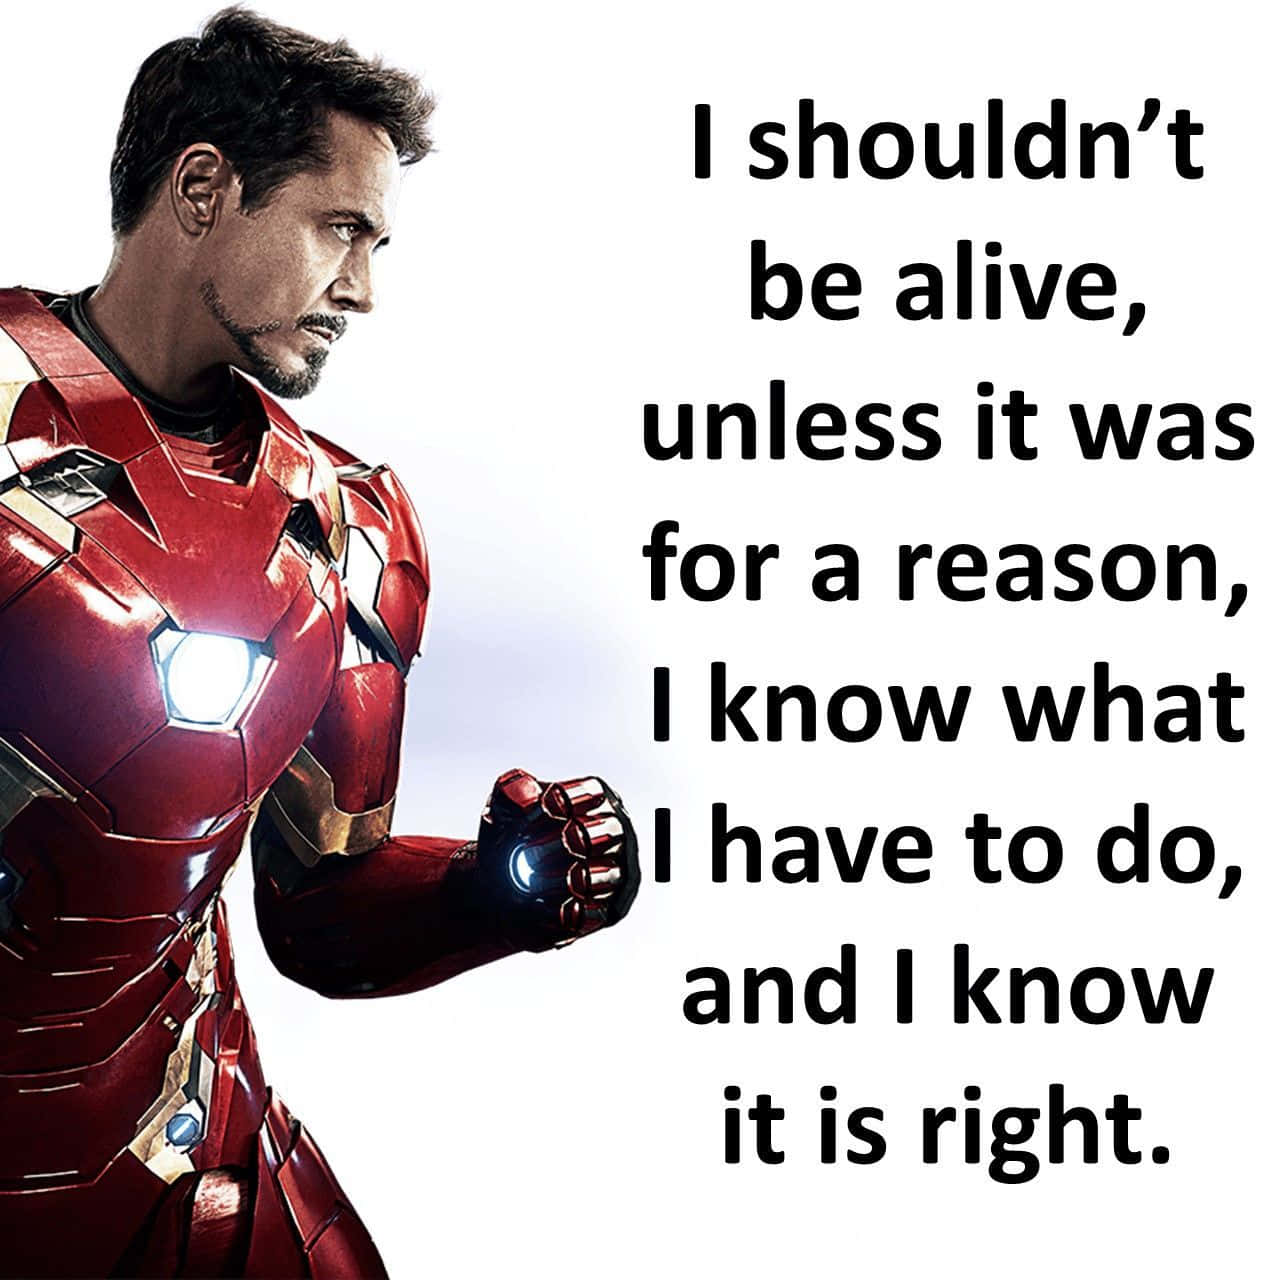 "It's not who I am underneath, but what I do that defines me." - Iron Man Wallpaper